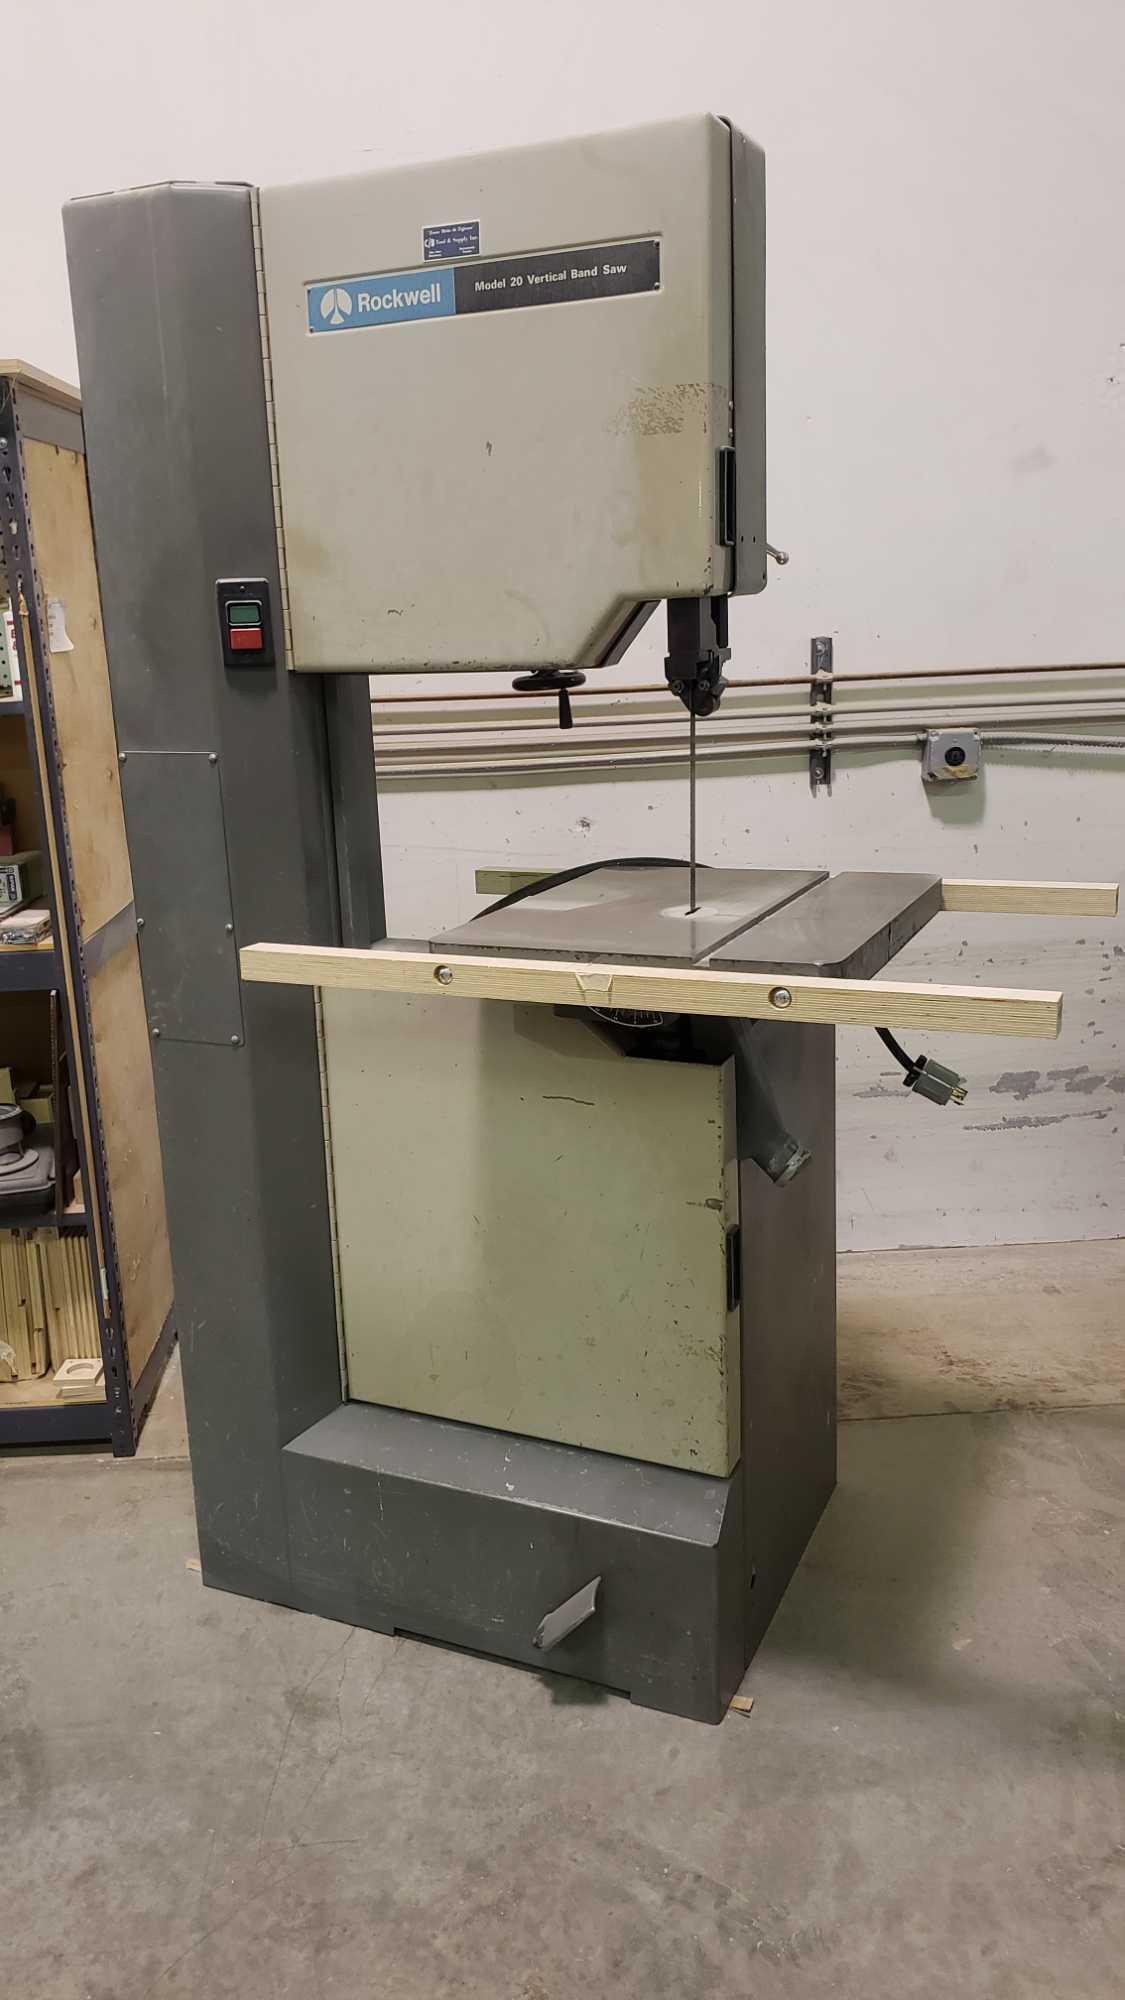 Rockwell Model 20 Vertical Band Saw